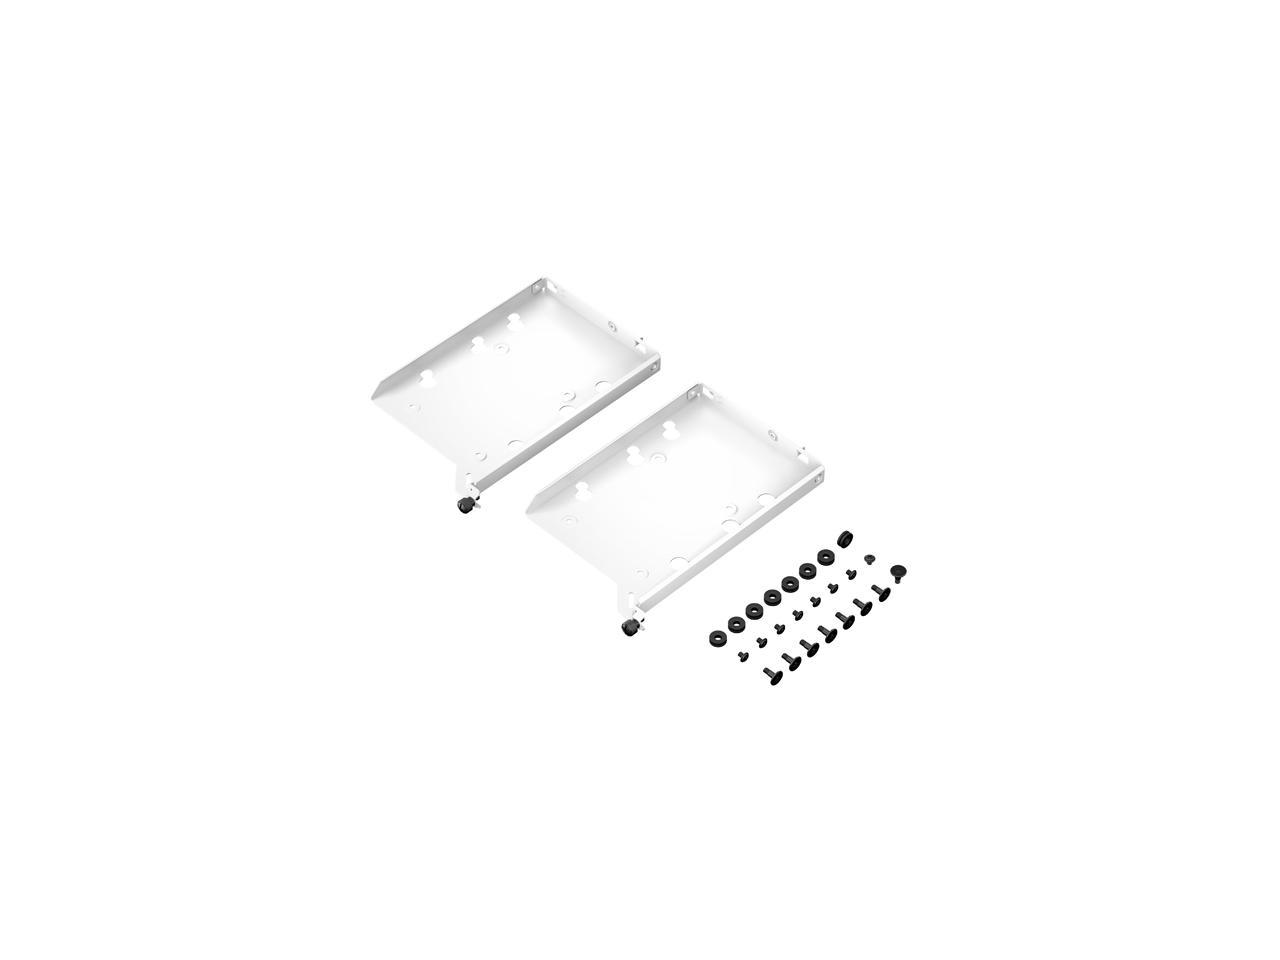 Fractal Design Fd-A-Tray-002 Hdd Tray Kit - Type-B (2-Pack) - White